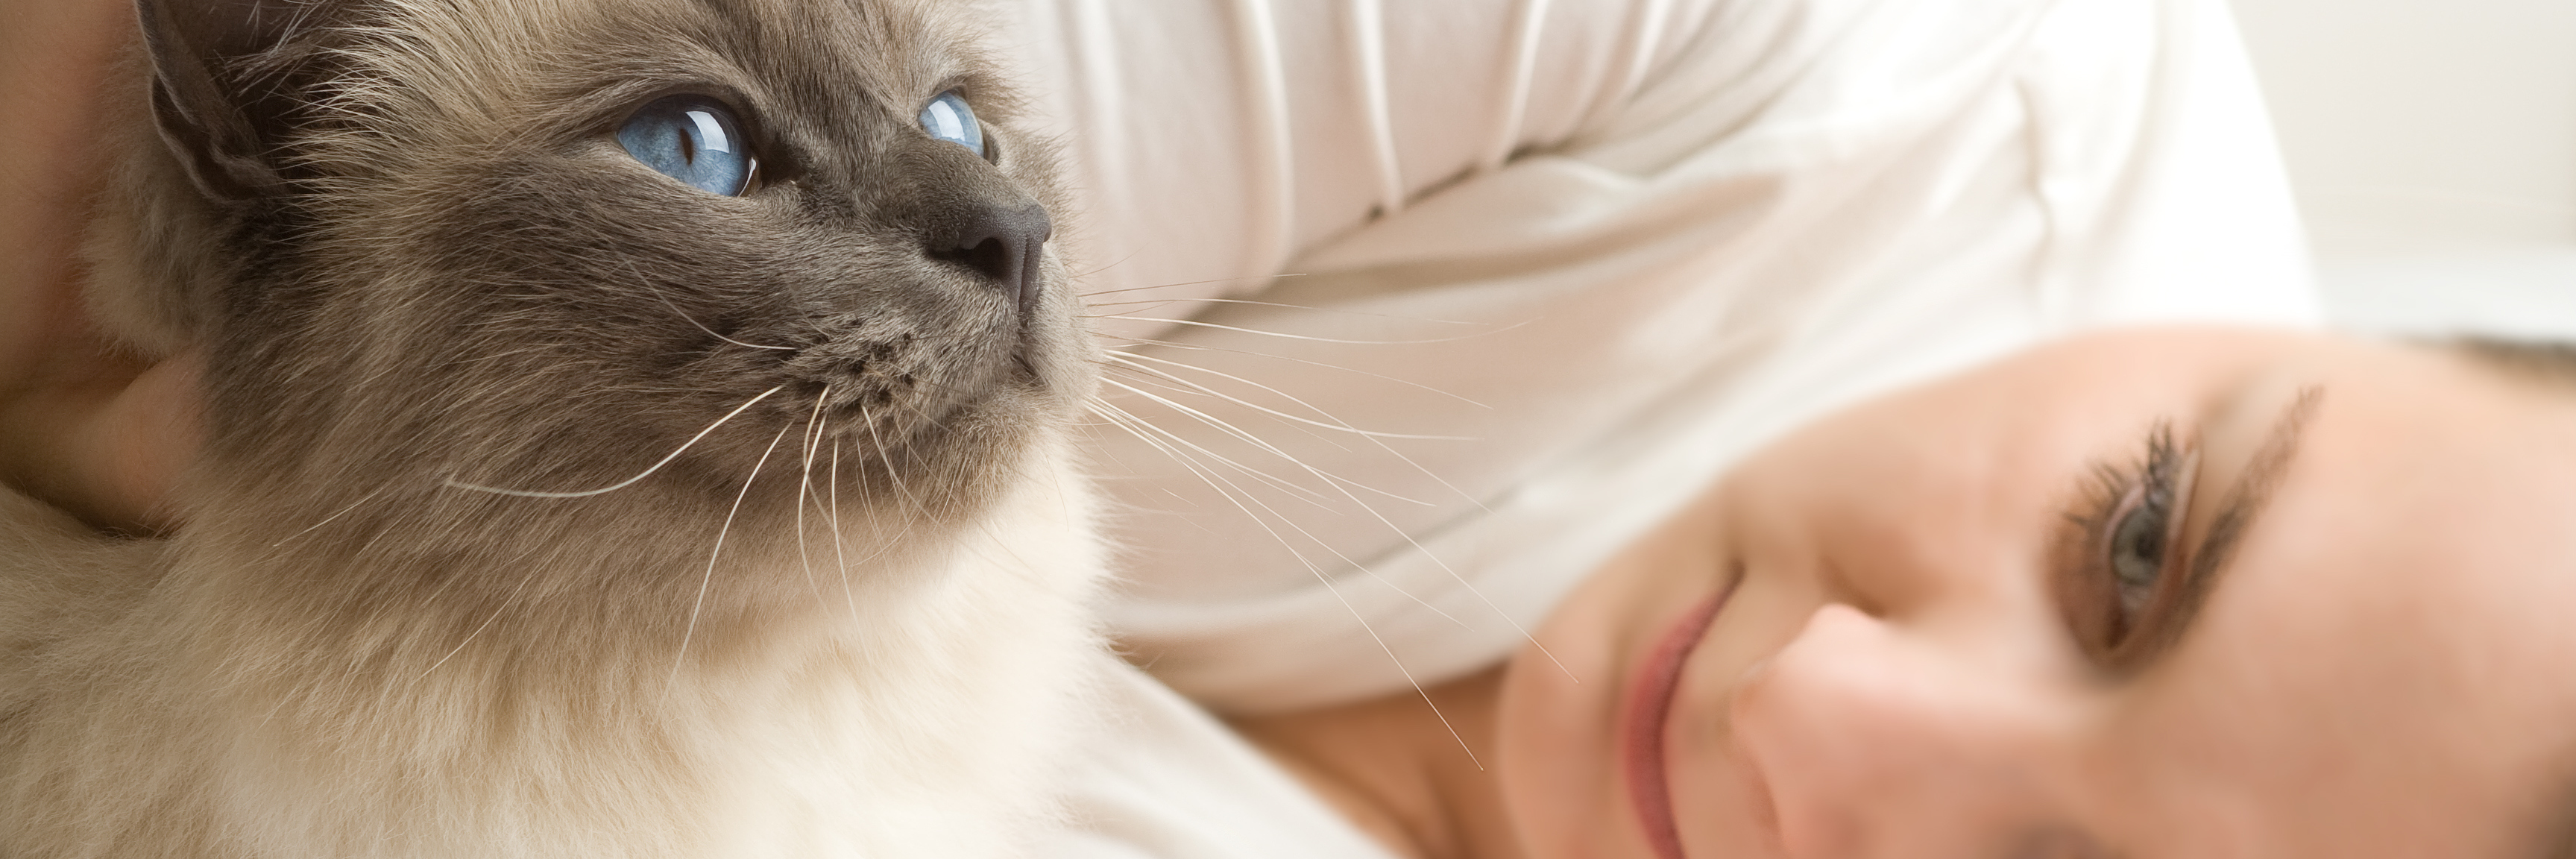 woman lying on bed next to blue eyed cat